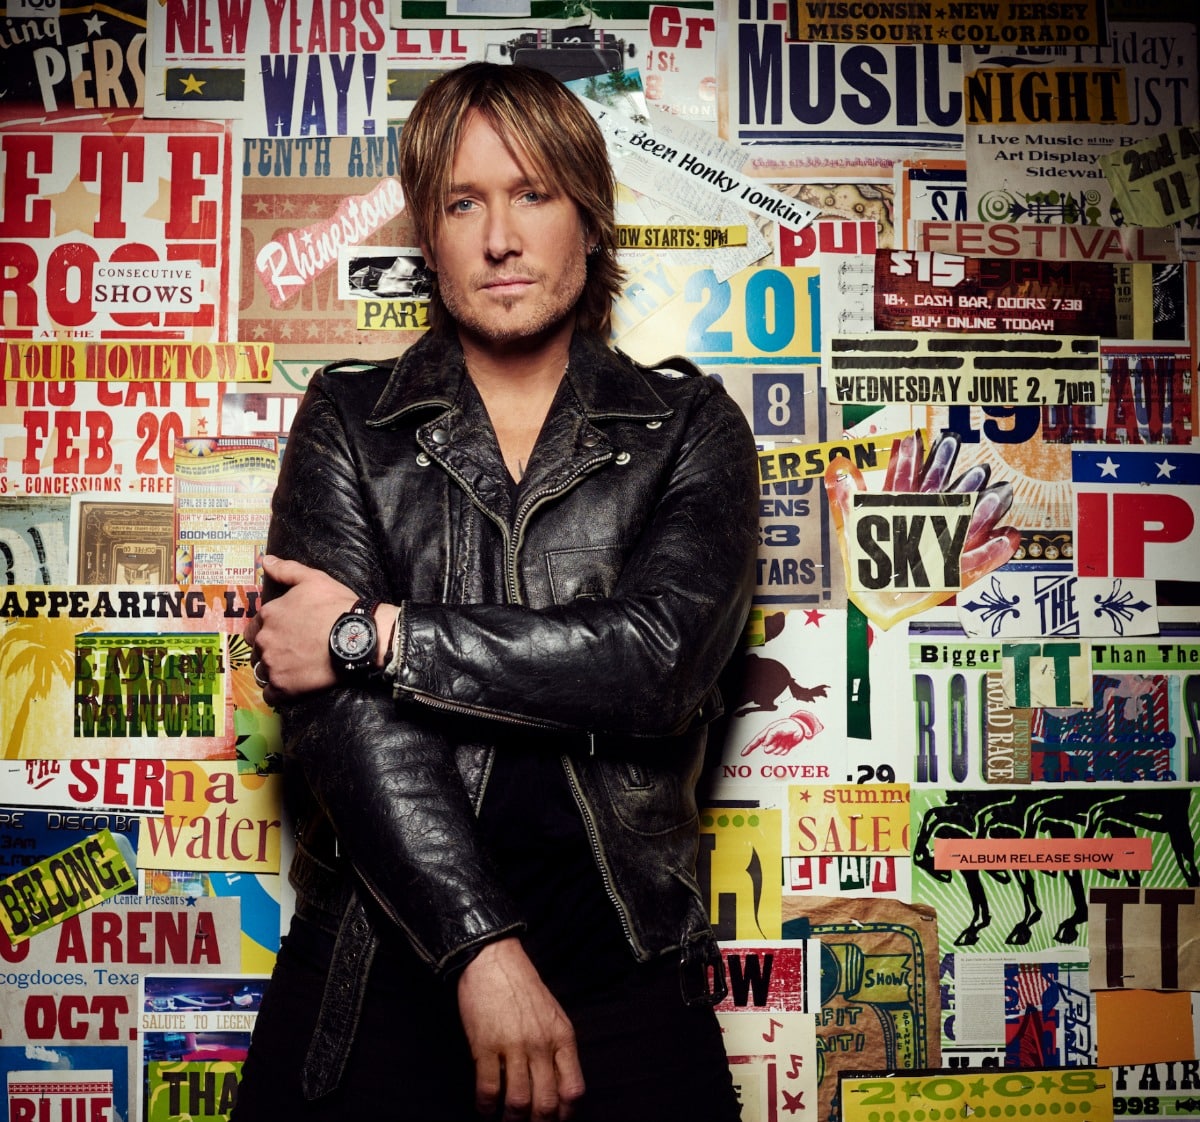 Keith Urban's new song, Female, celebrates women and girls...